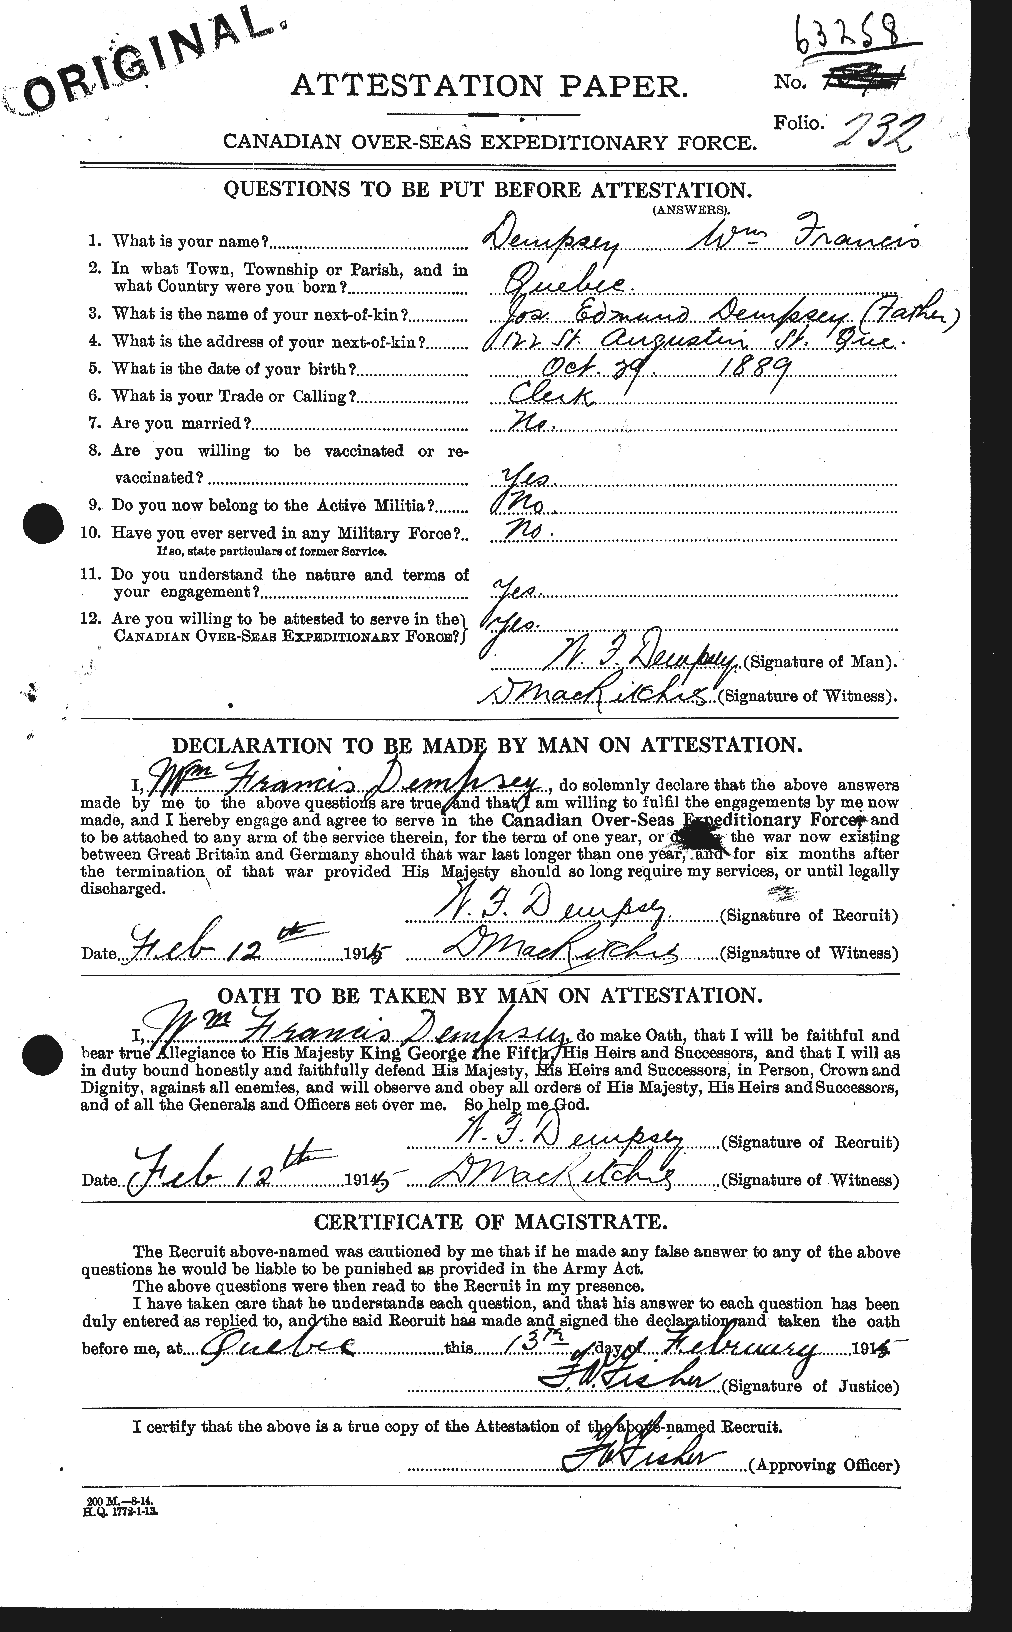 Personnel Records of the First World War - CEF 286930a